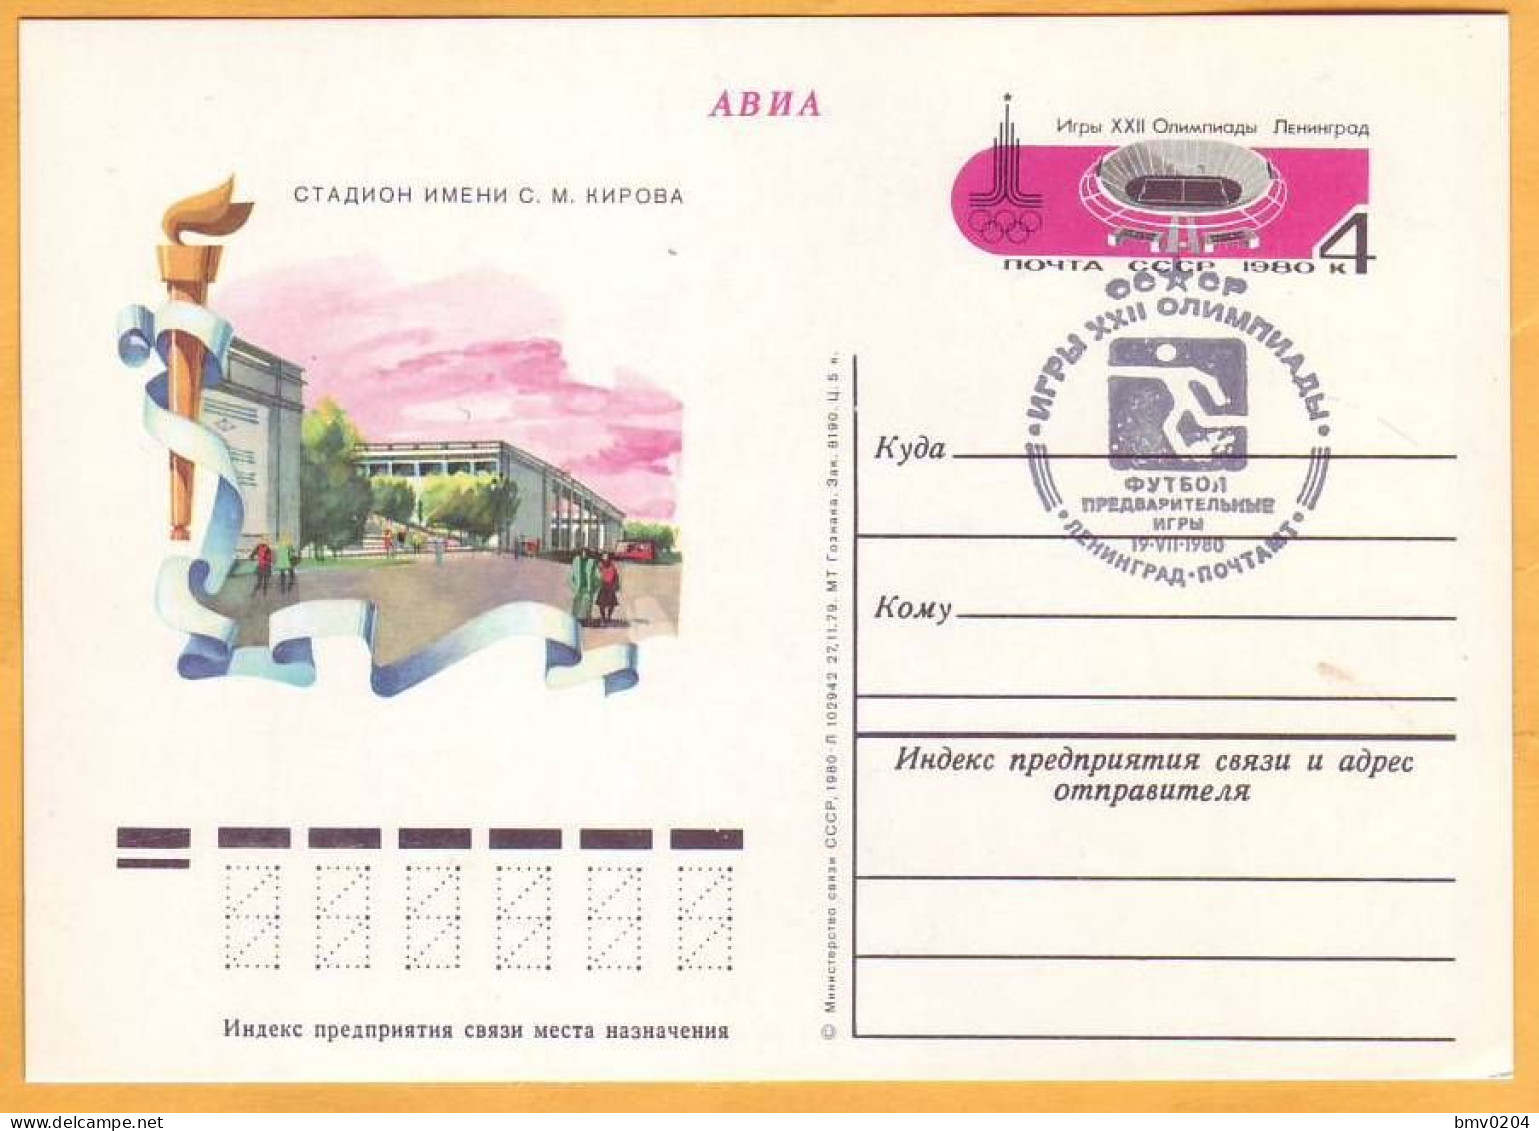 1978 1979 Russia USSR 7 postcards Moscow Olympics - 80 Art, culture, stage, theater Sports, stadiums, architecture